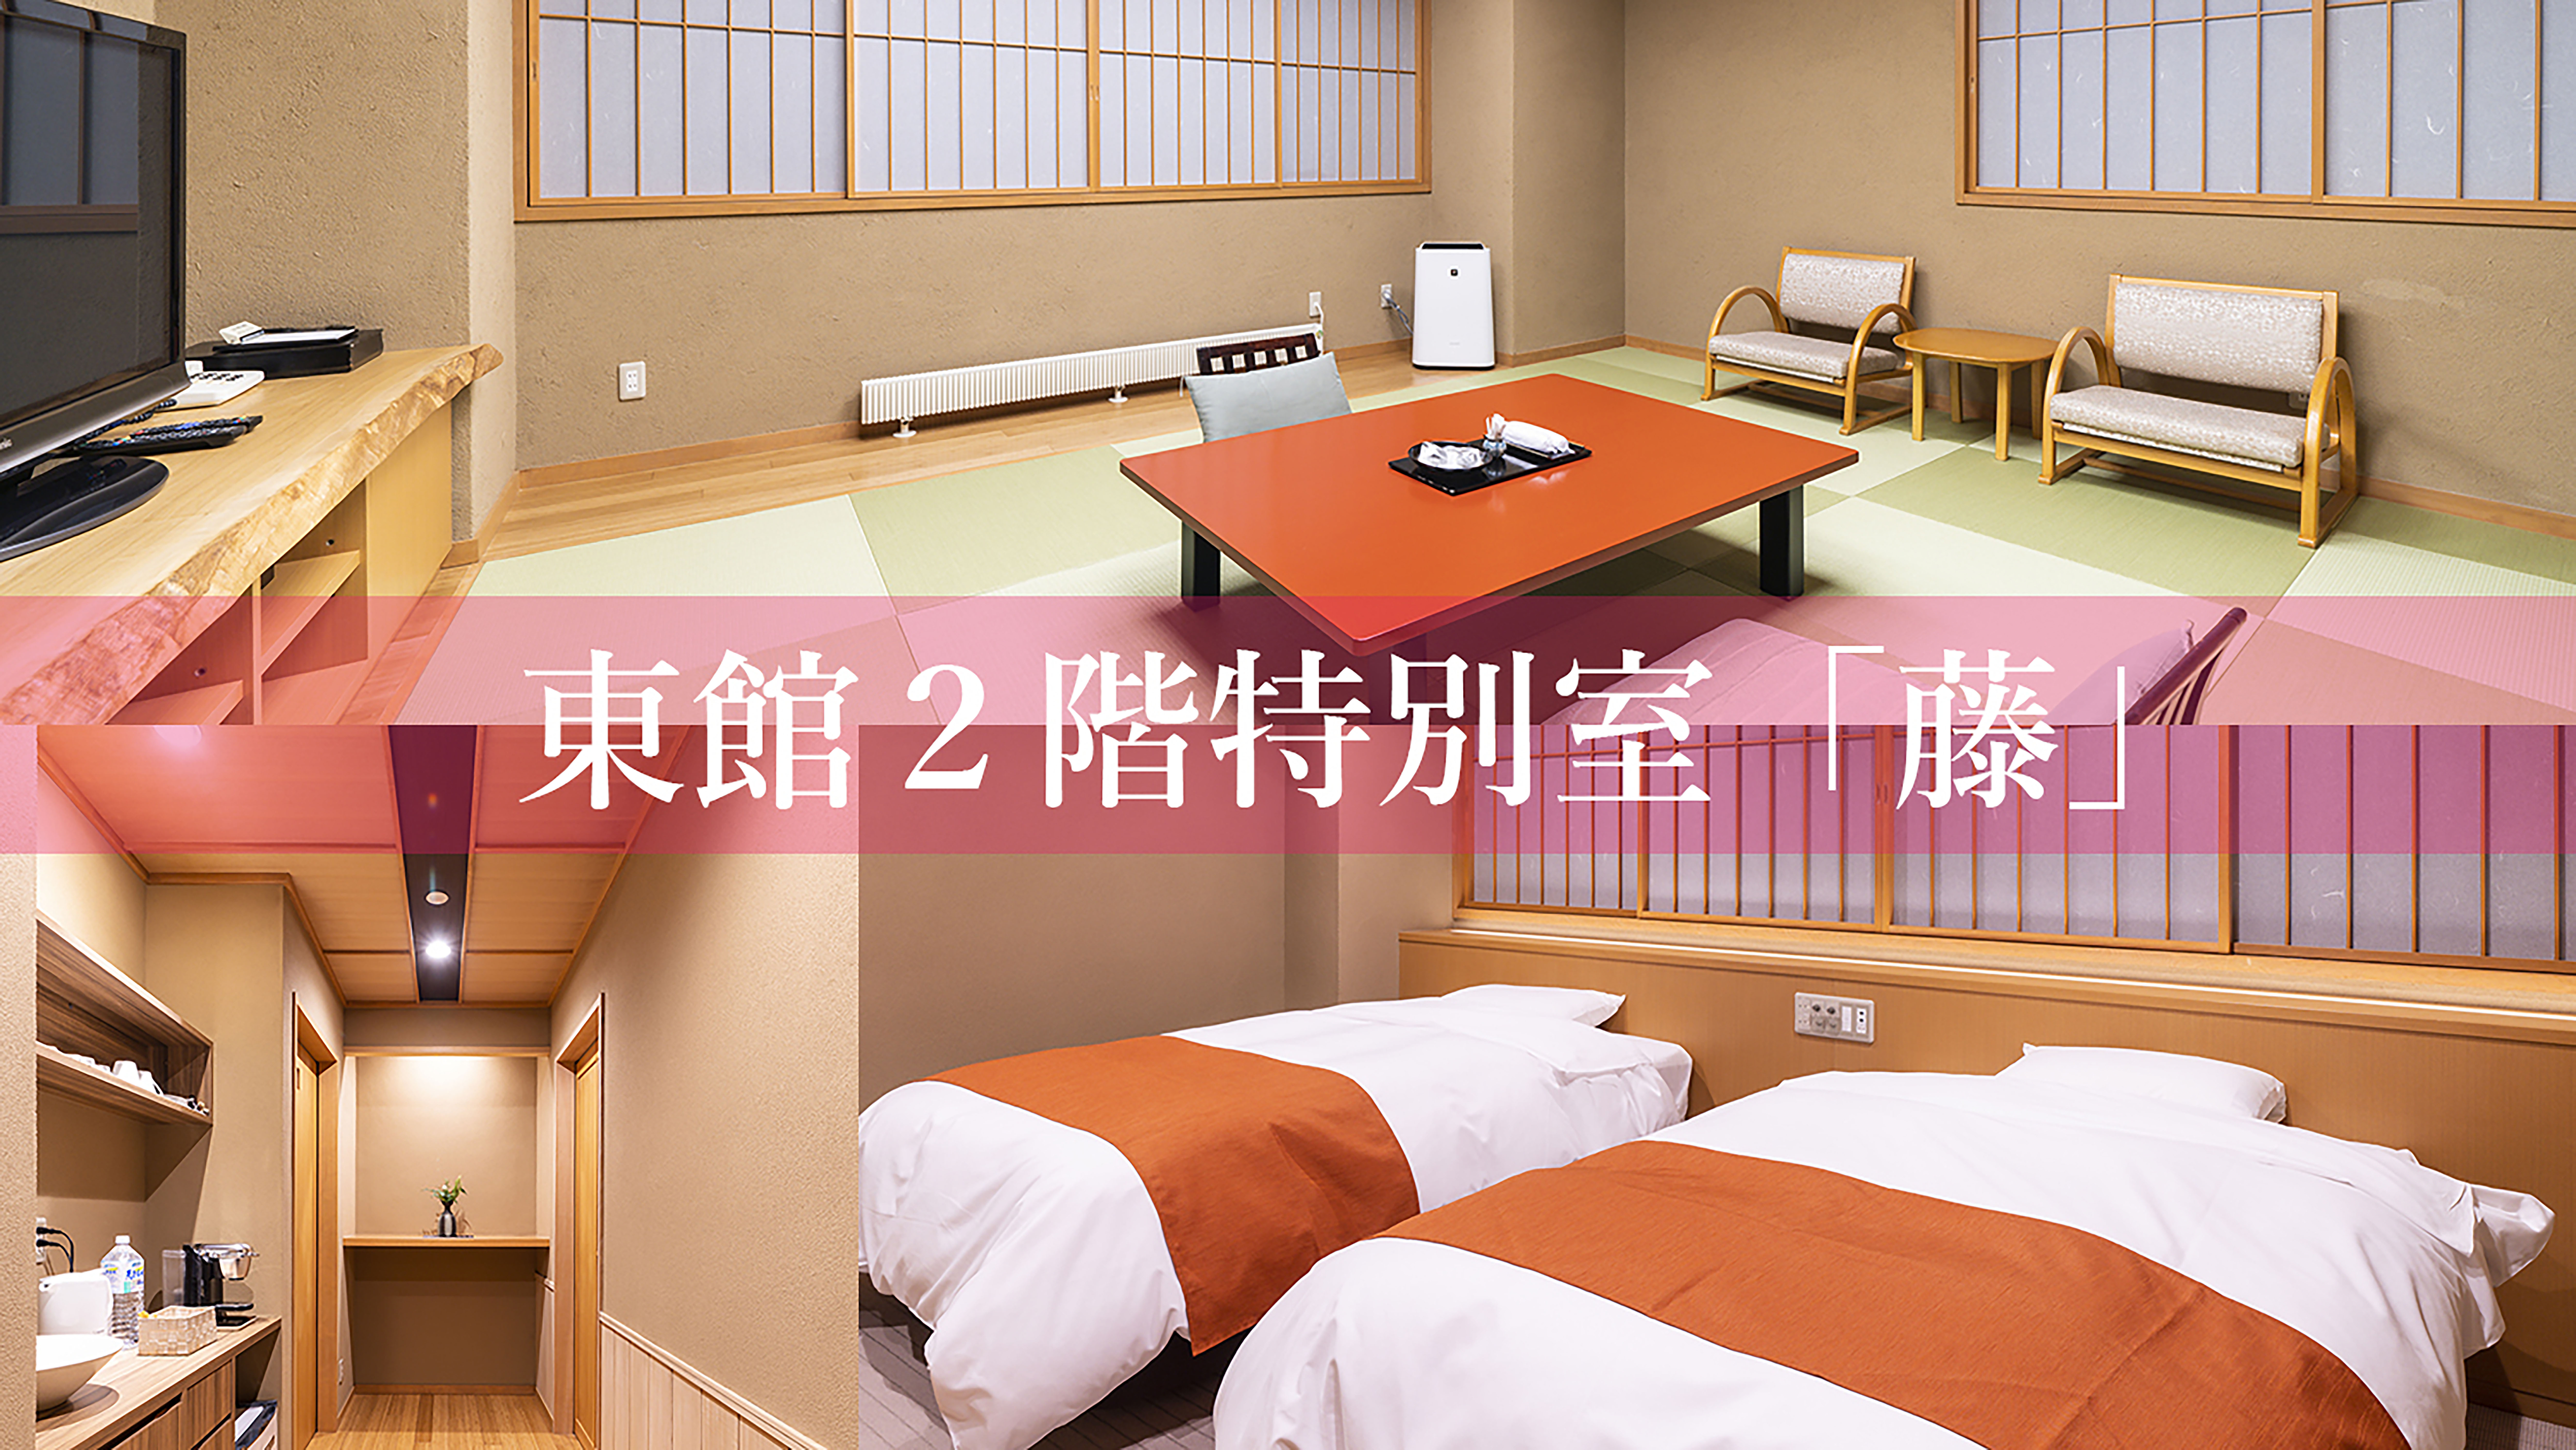 Special Japanese and Western room "Wisteria" on the 2nd floor of the East Building